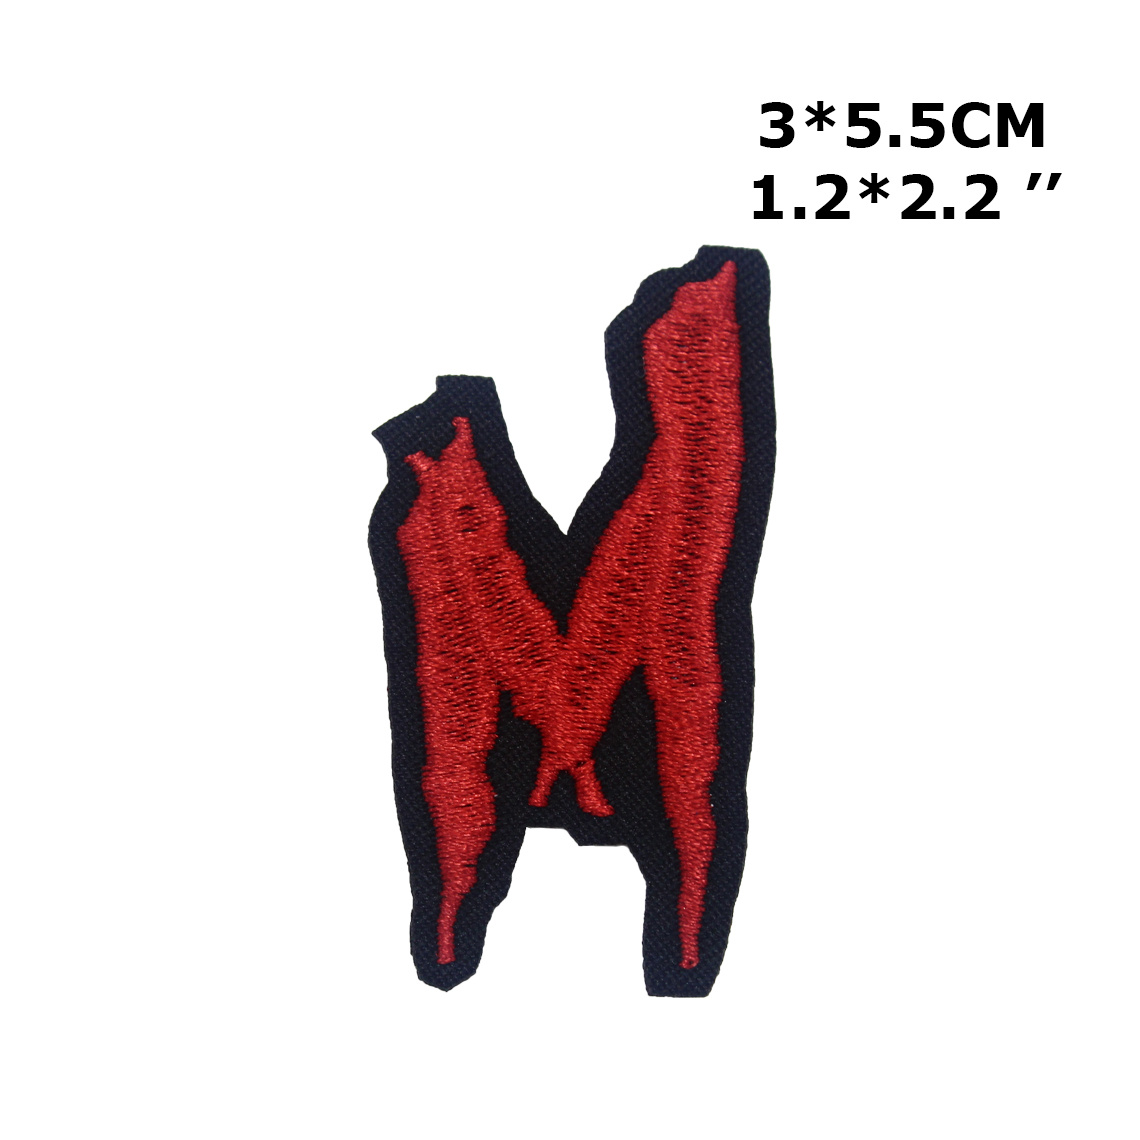 Patch Letters Red Embroidered 5.5cm Iron On Sew On Patches Appliqué